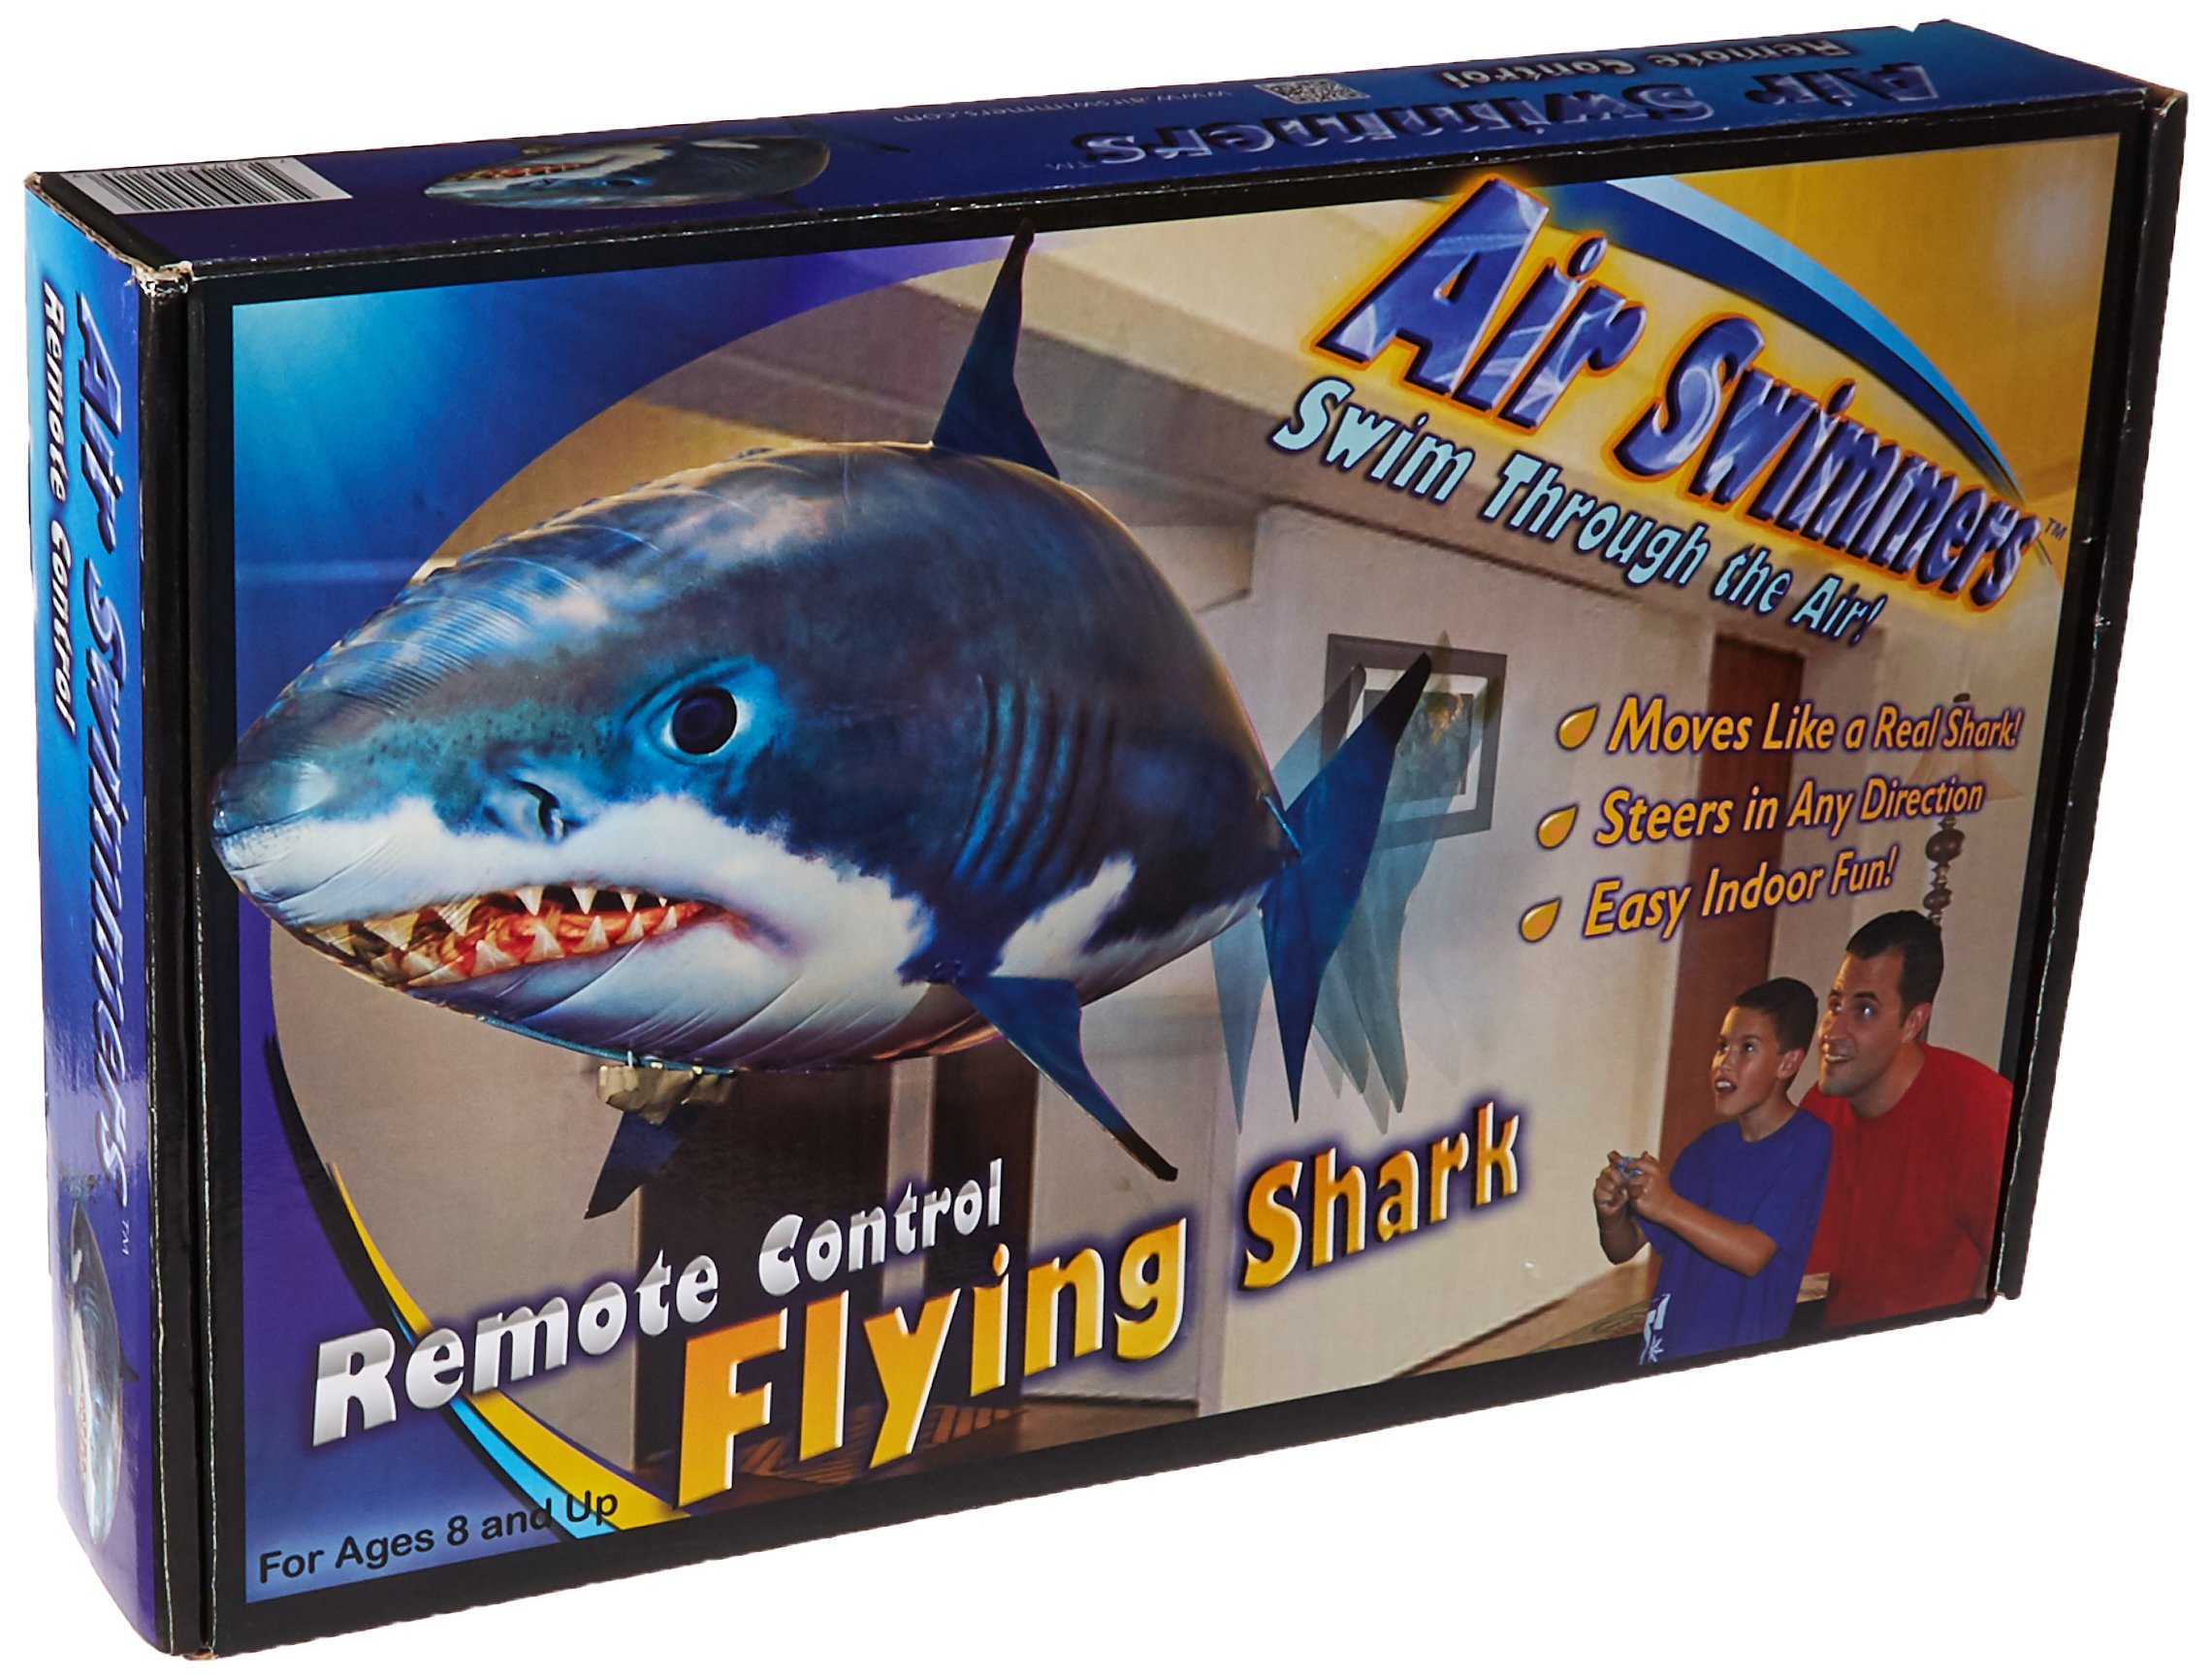 FLYING  WHITE SHARK TOY KIDS HELIYM BALLOON FISH AIR SWIMMERS REMOTE CONTROL 